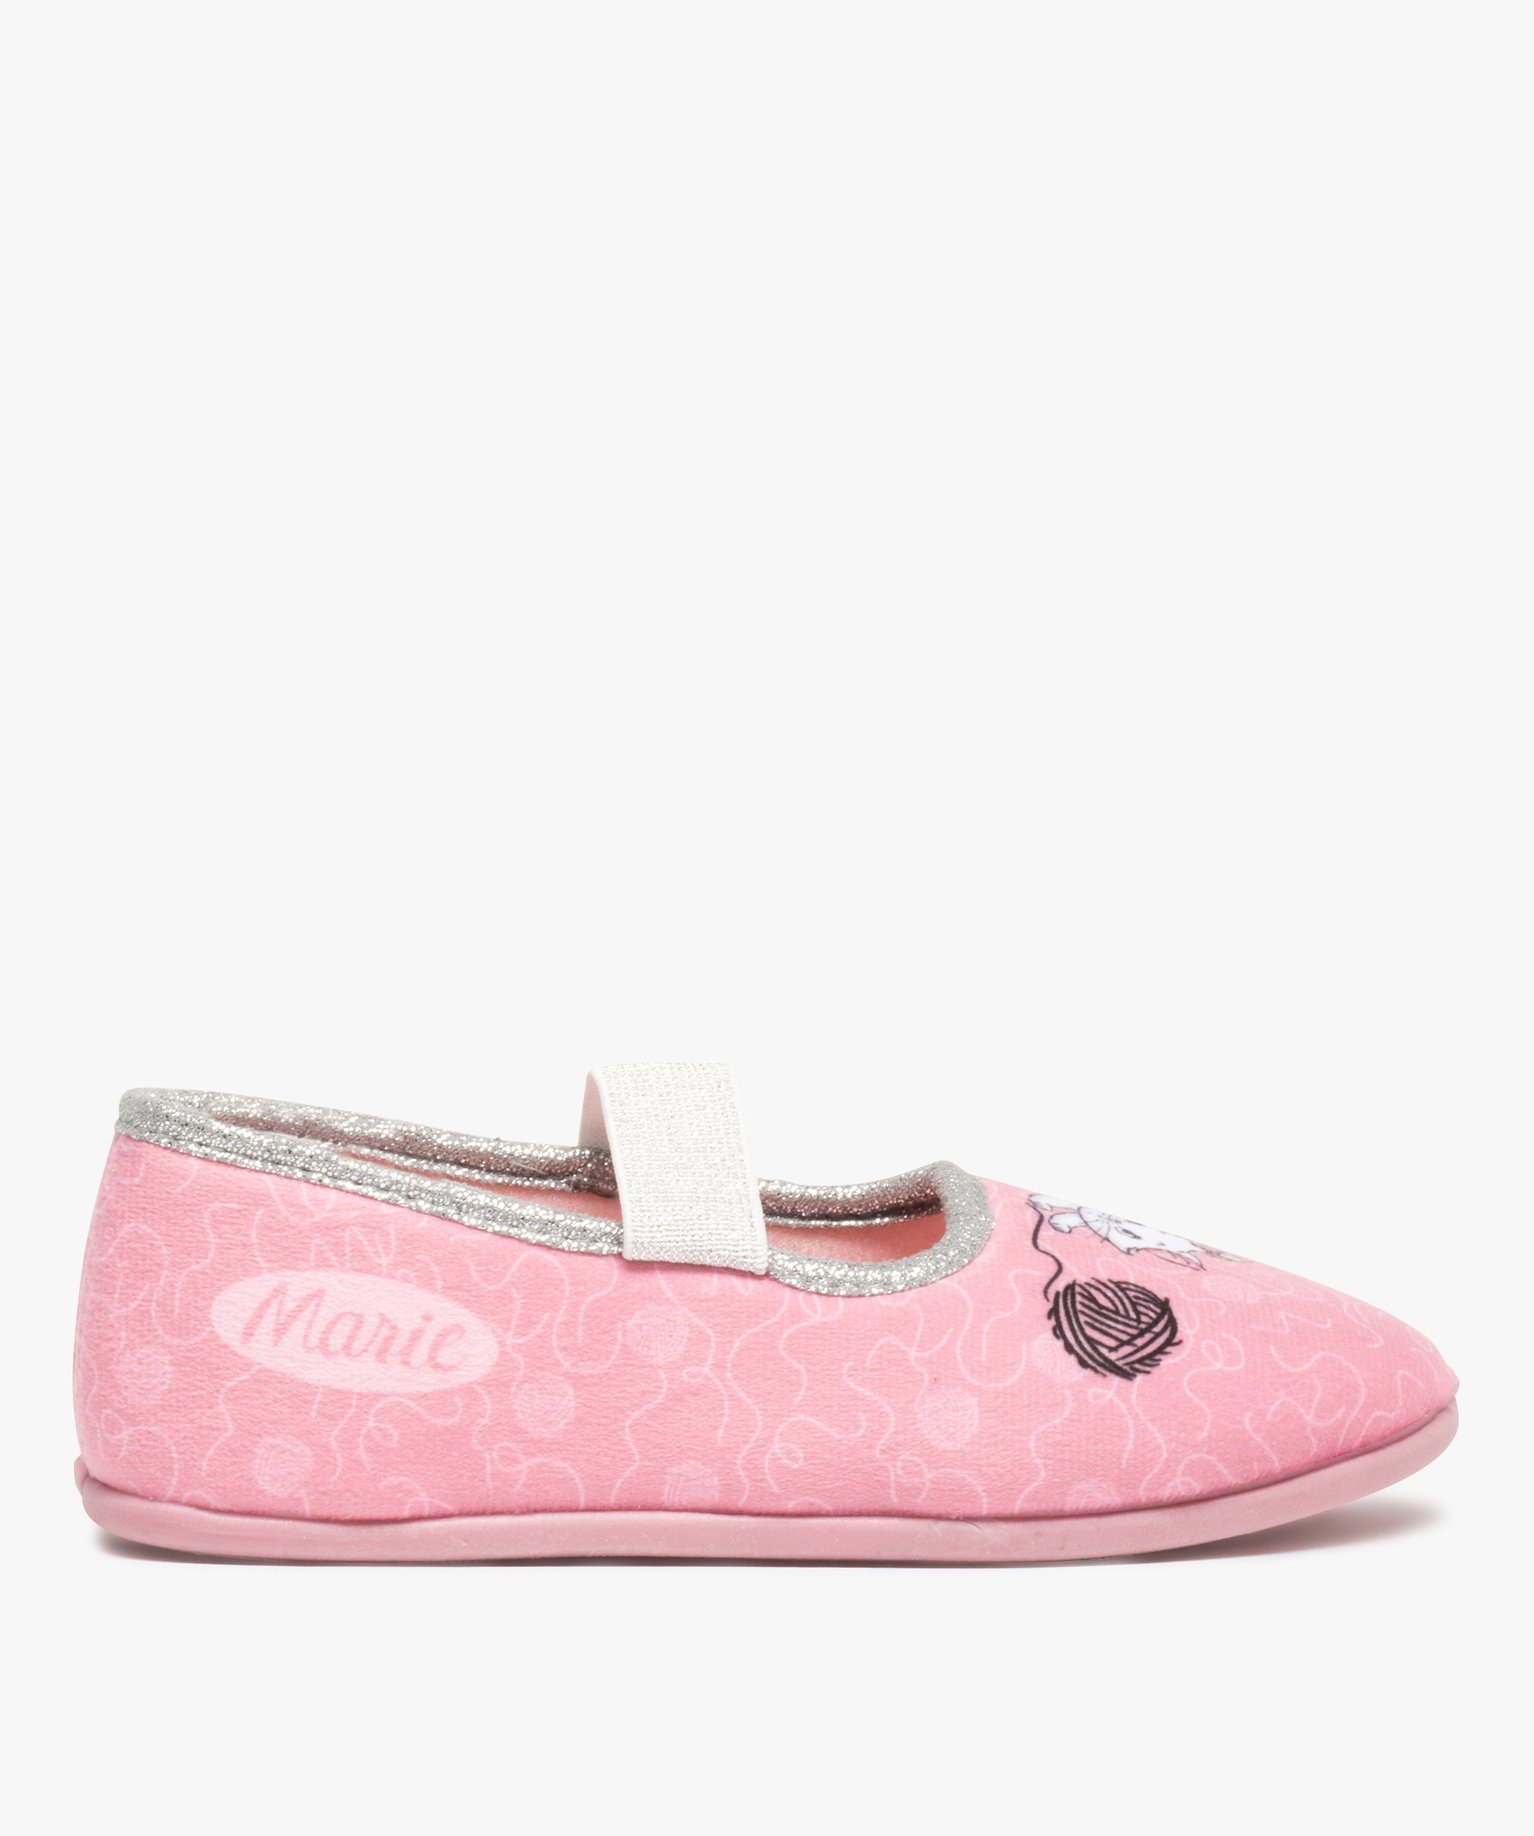 chaussons fille ballerines les aristochats - disney rose fille